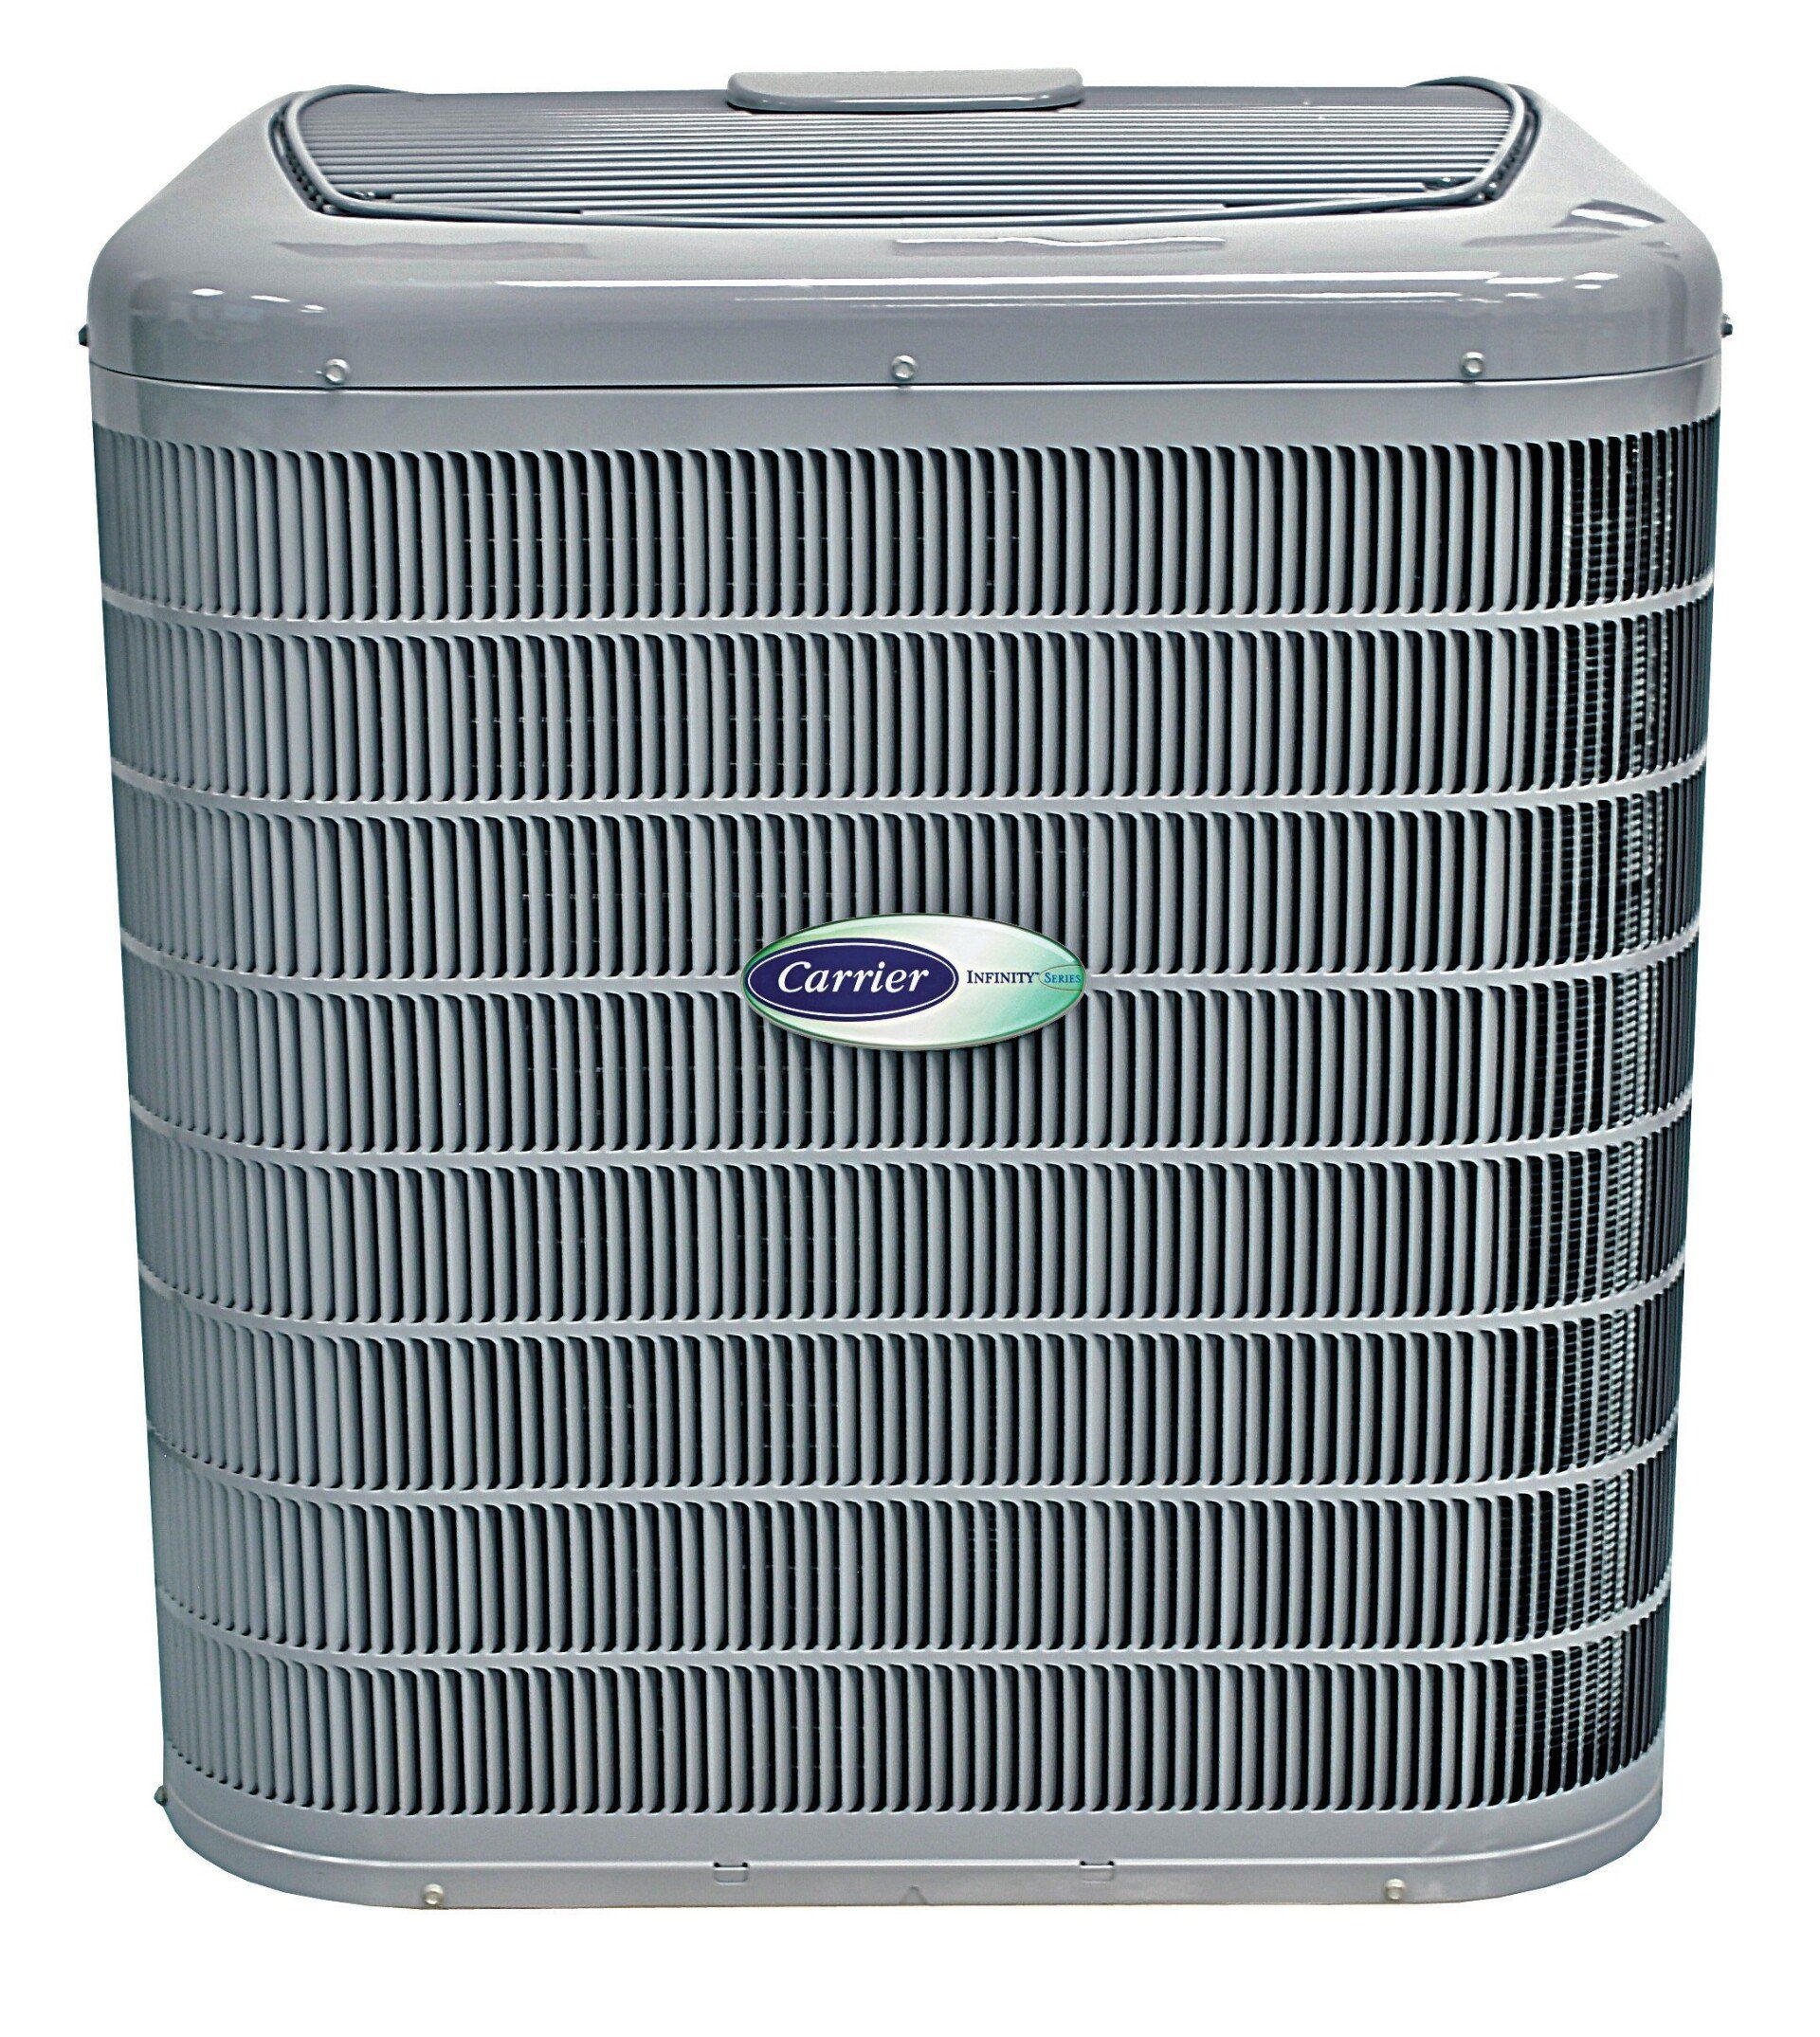 Carrier's 24ANB1 Air Conditioner